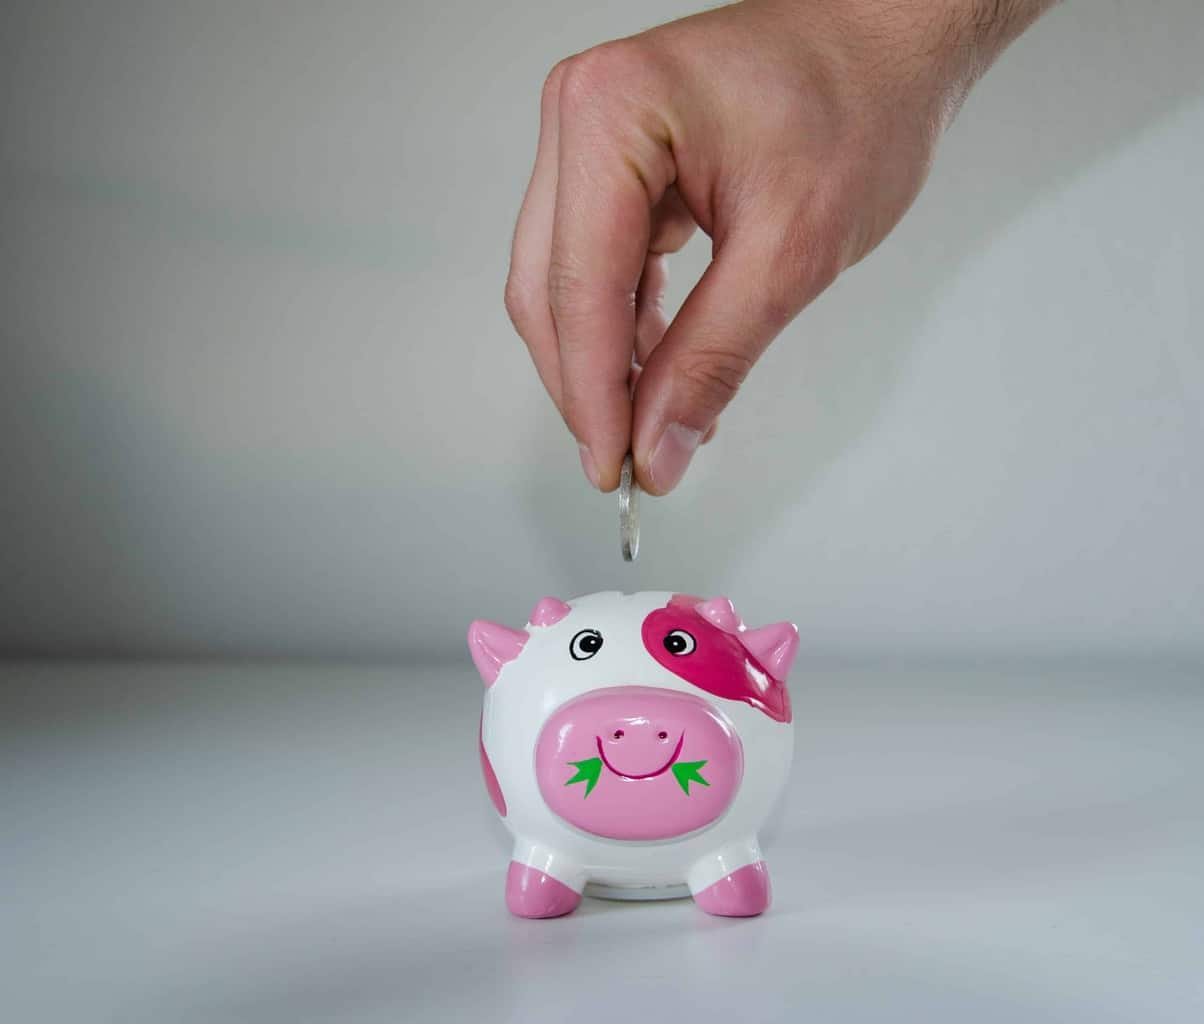 Living Frugal: 3 Important Things to Remember When Creating an Emergency Savings Fund